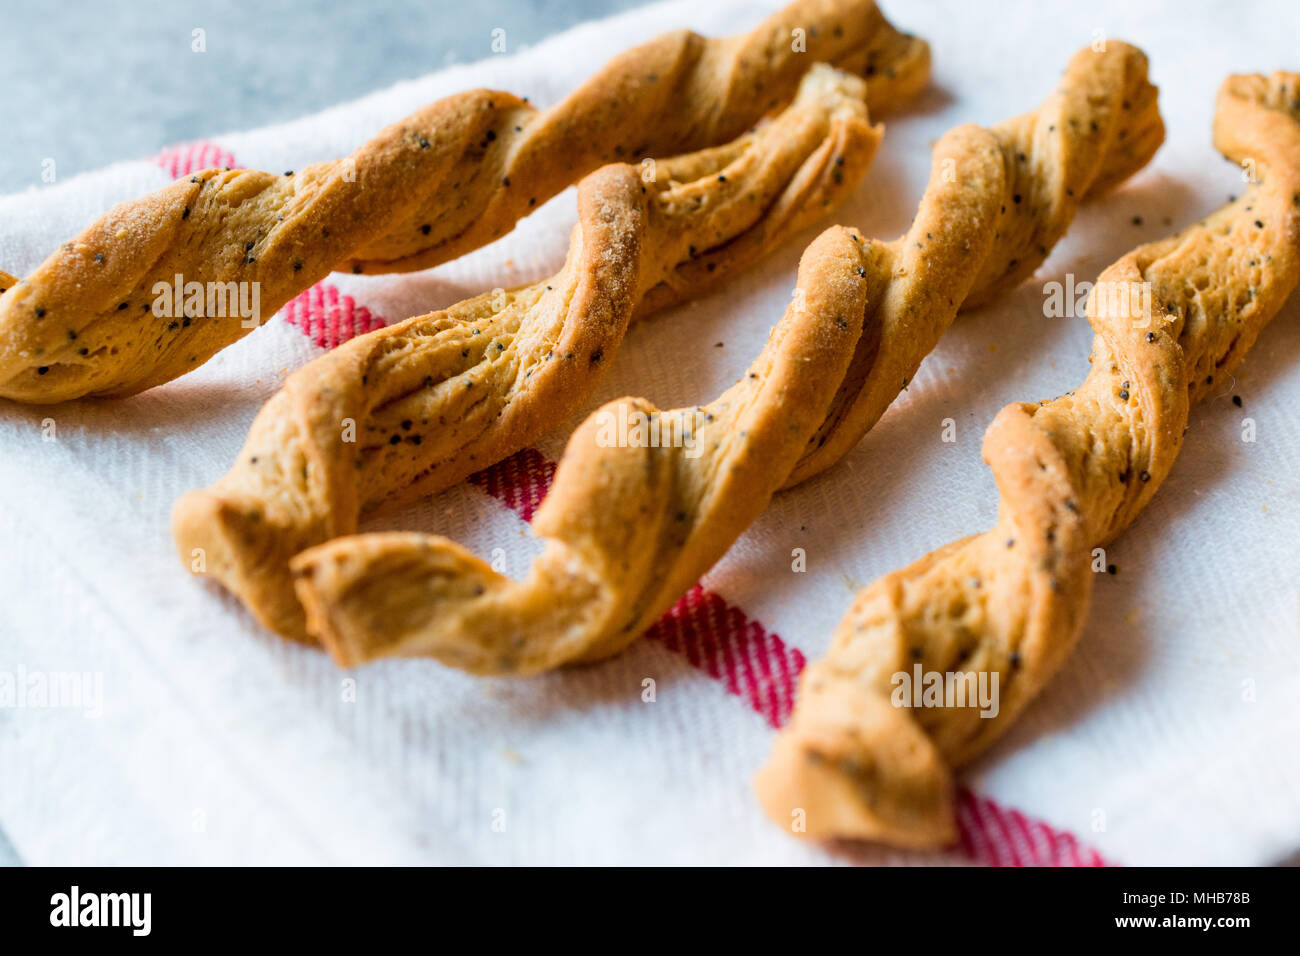 Mille Feuille Twisted Bread Stick Crackers with Spices, Tomato Flavor and Black Sesame or Cumins. Organic Food. Stock Photo